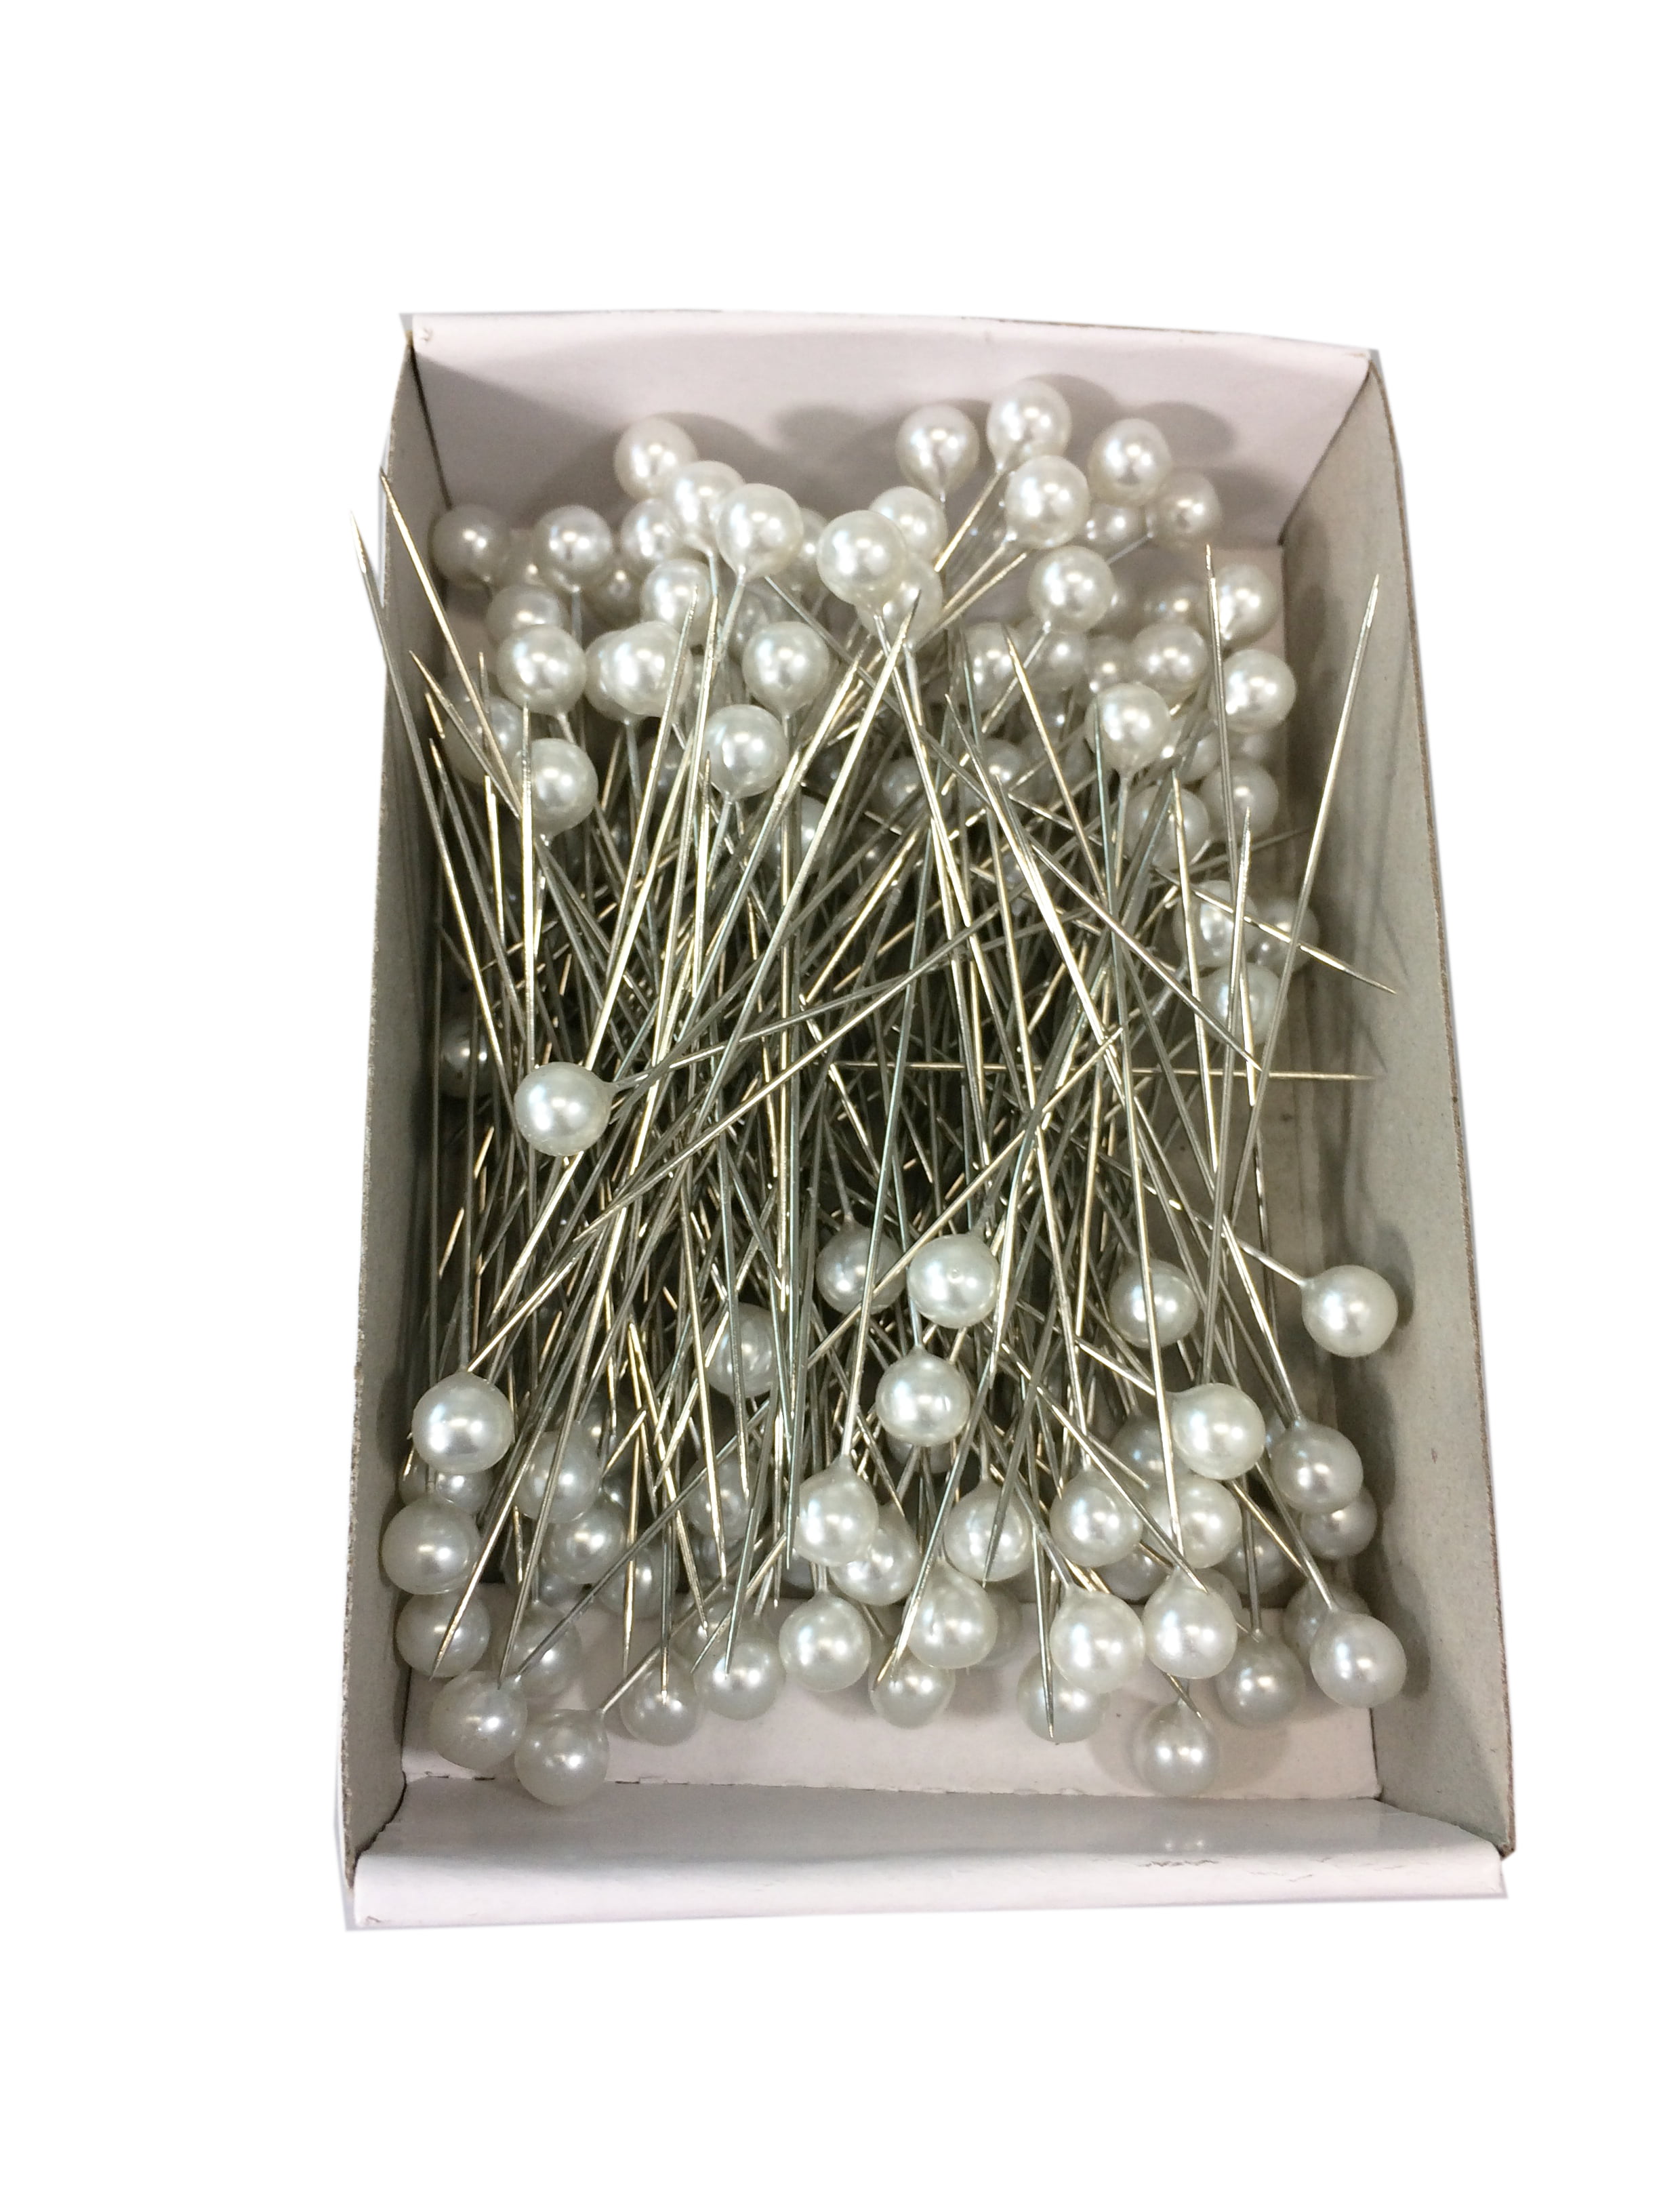 1 1/2 Inch Pearl Boutonniere Pins - 144 ct